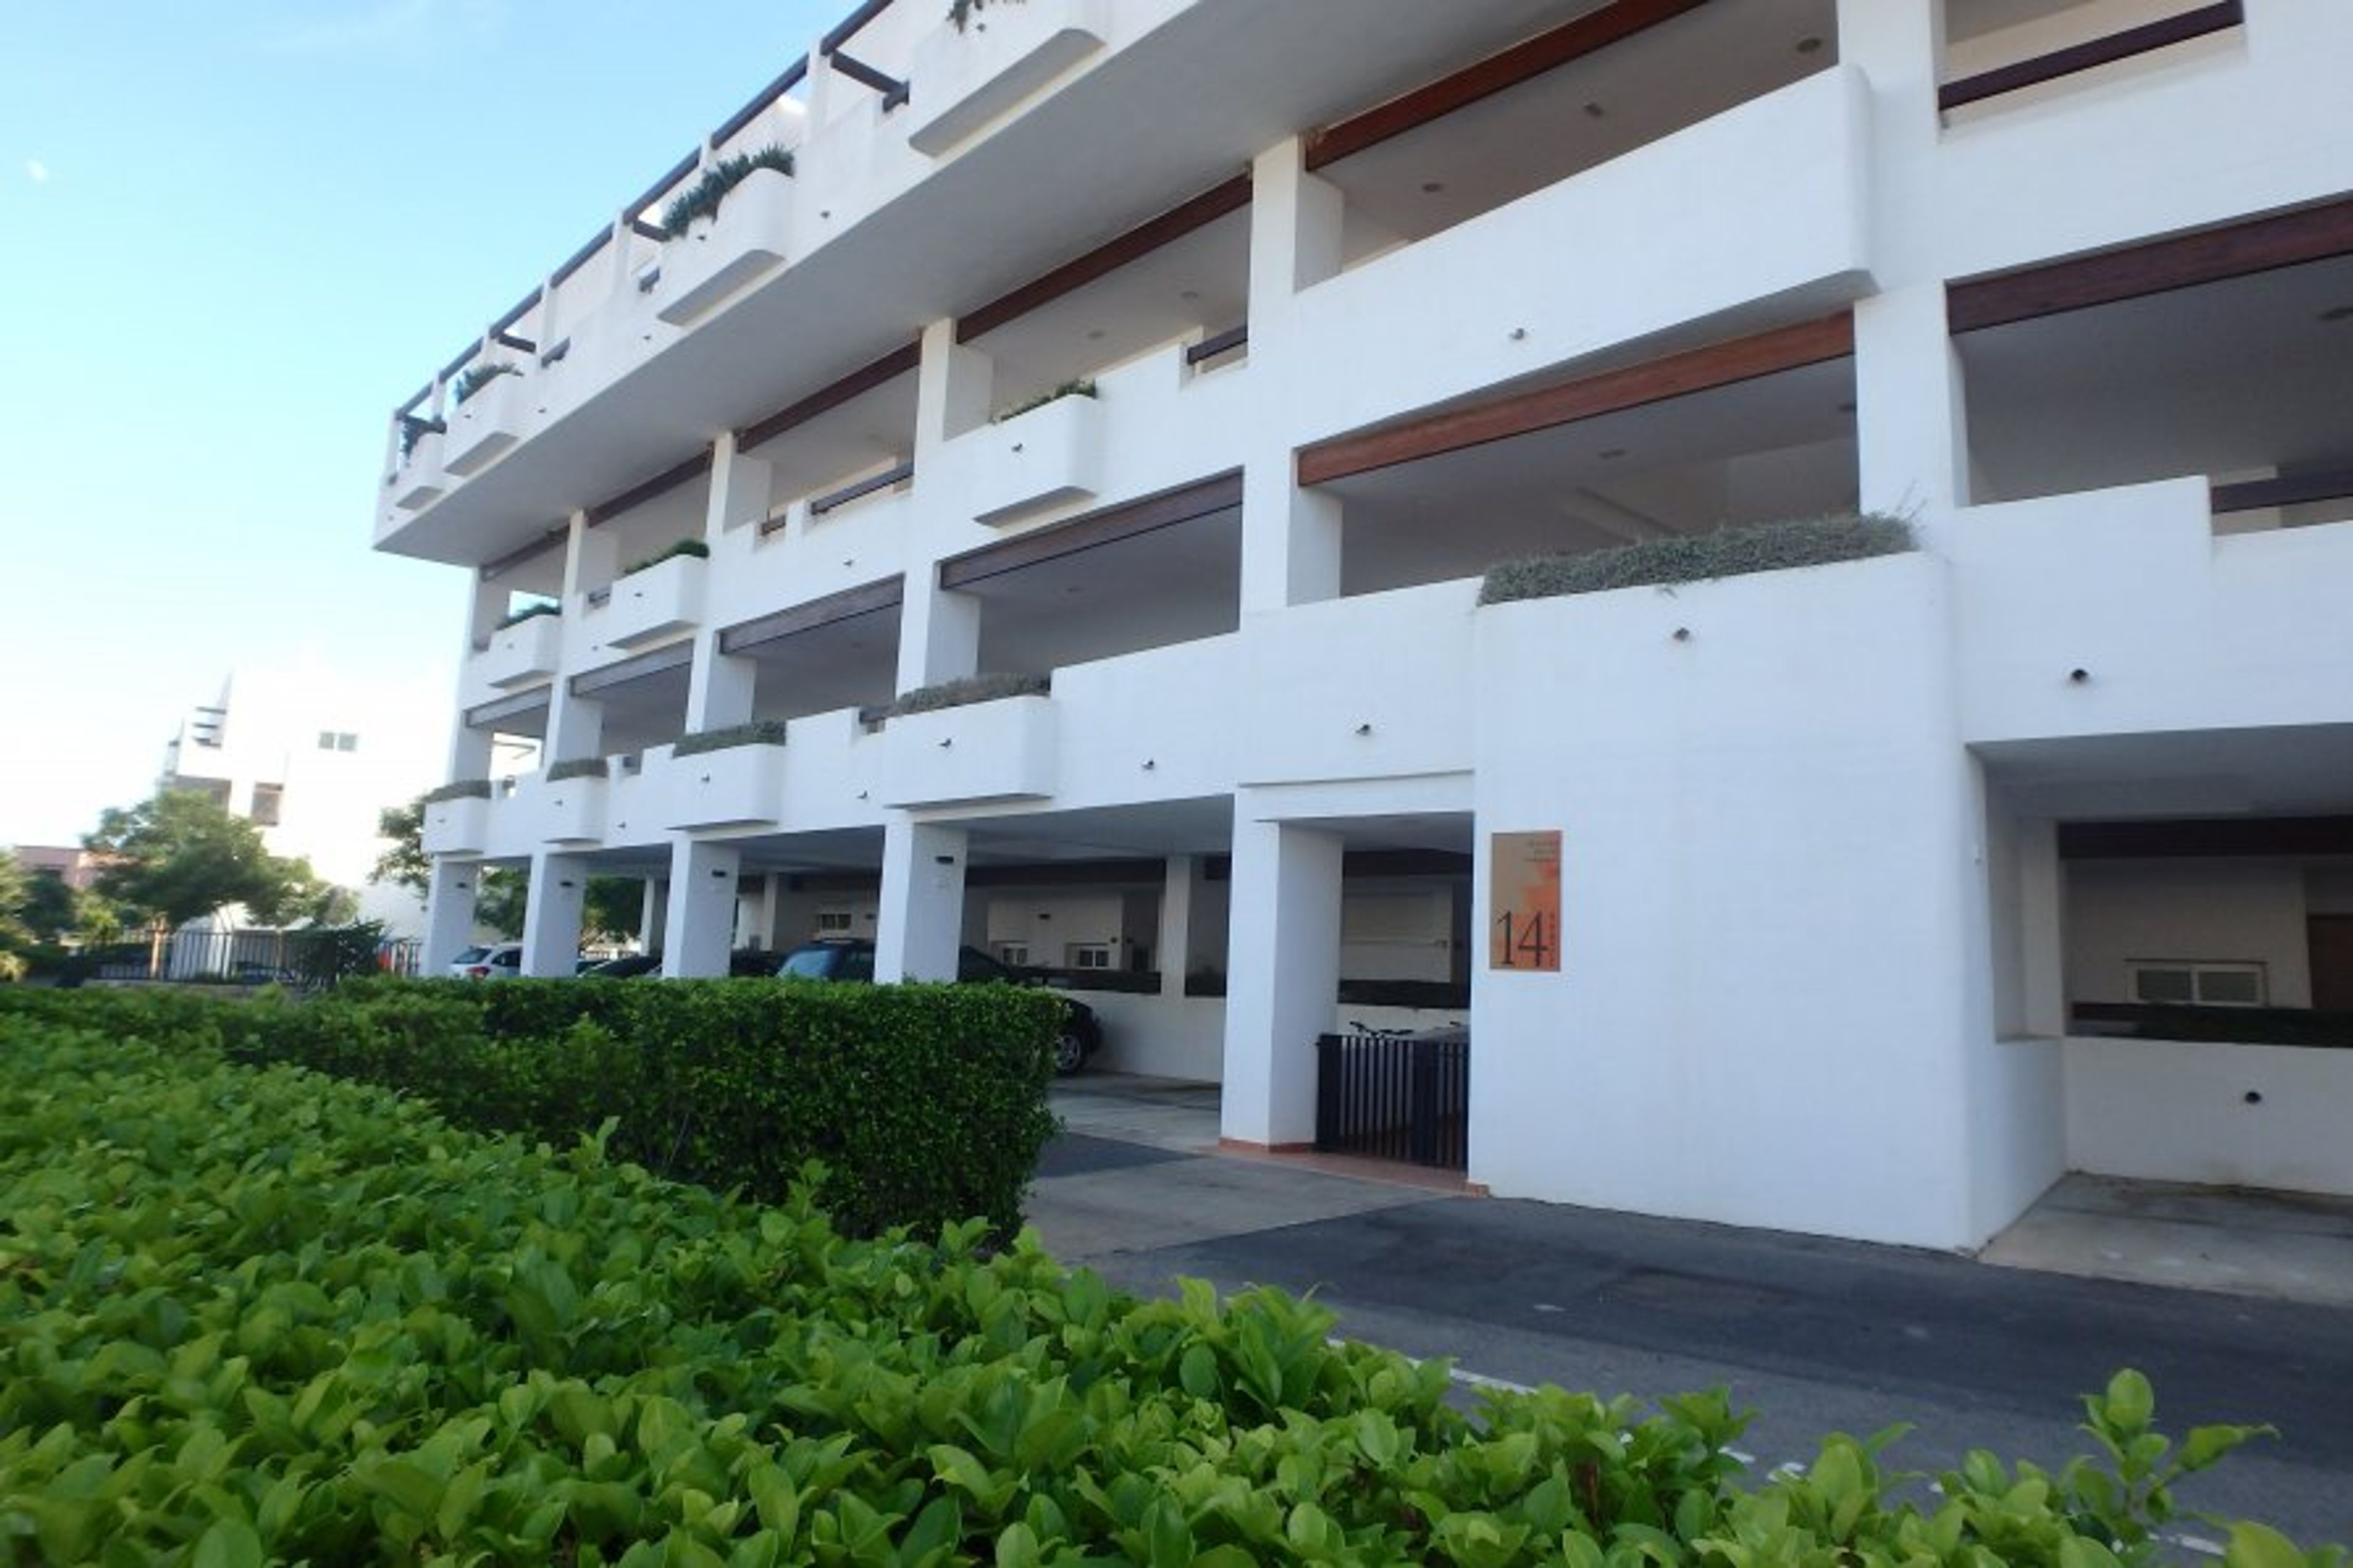 Front of Penthouse Block 14 with parking area.